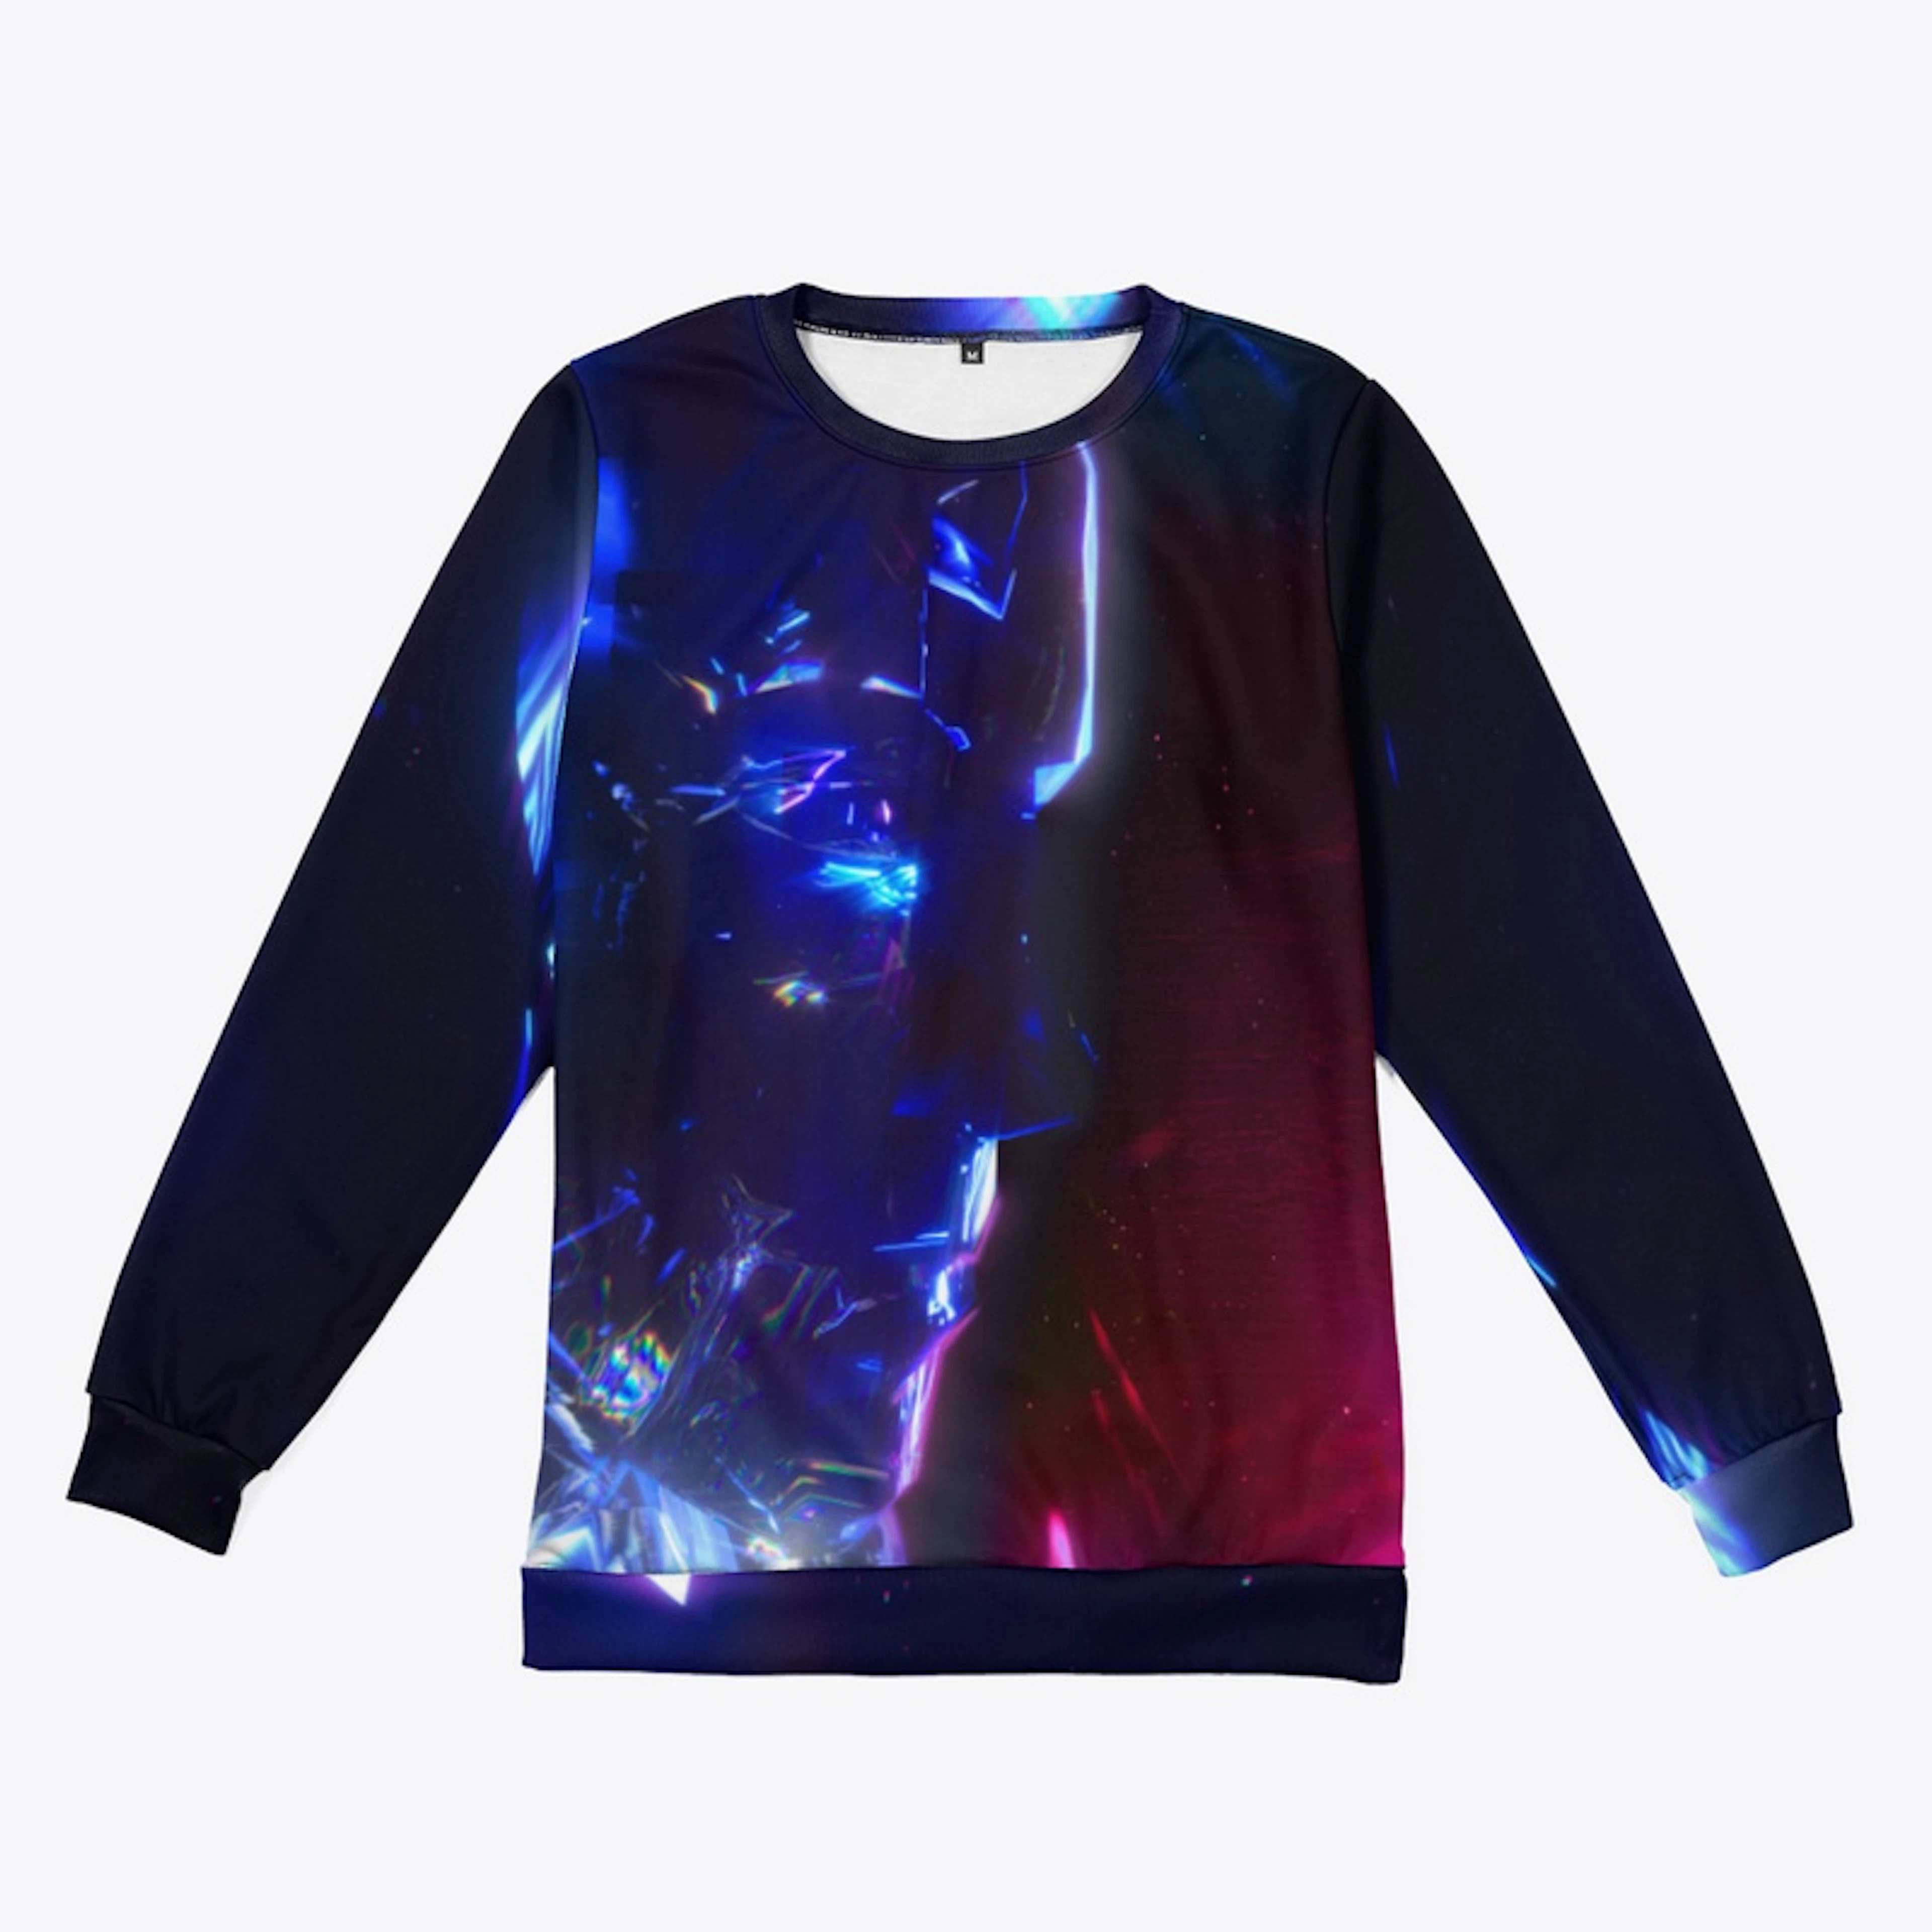 NYP7: The Humans - All-over Sweatshirt